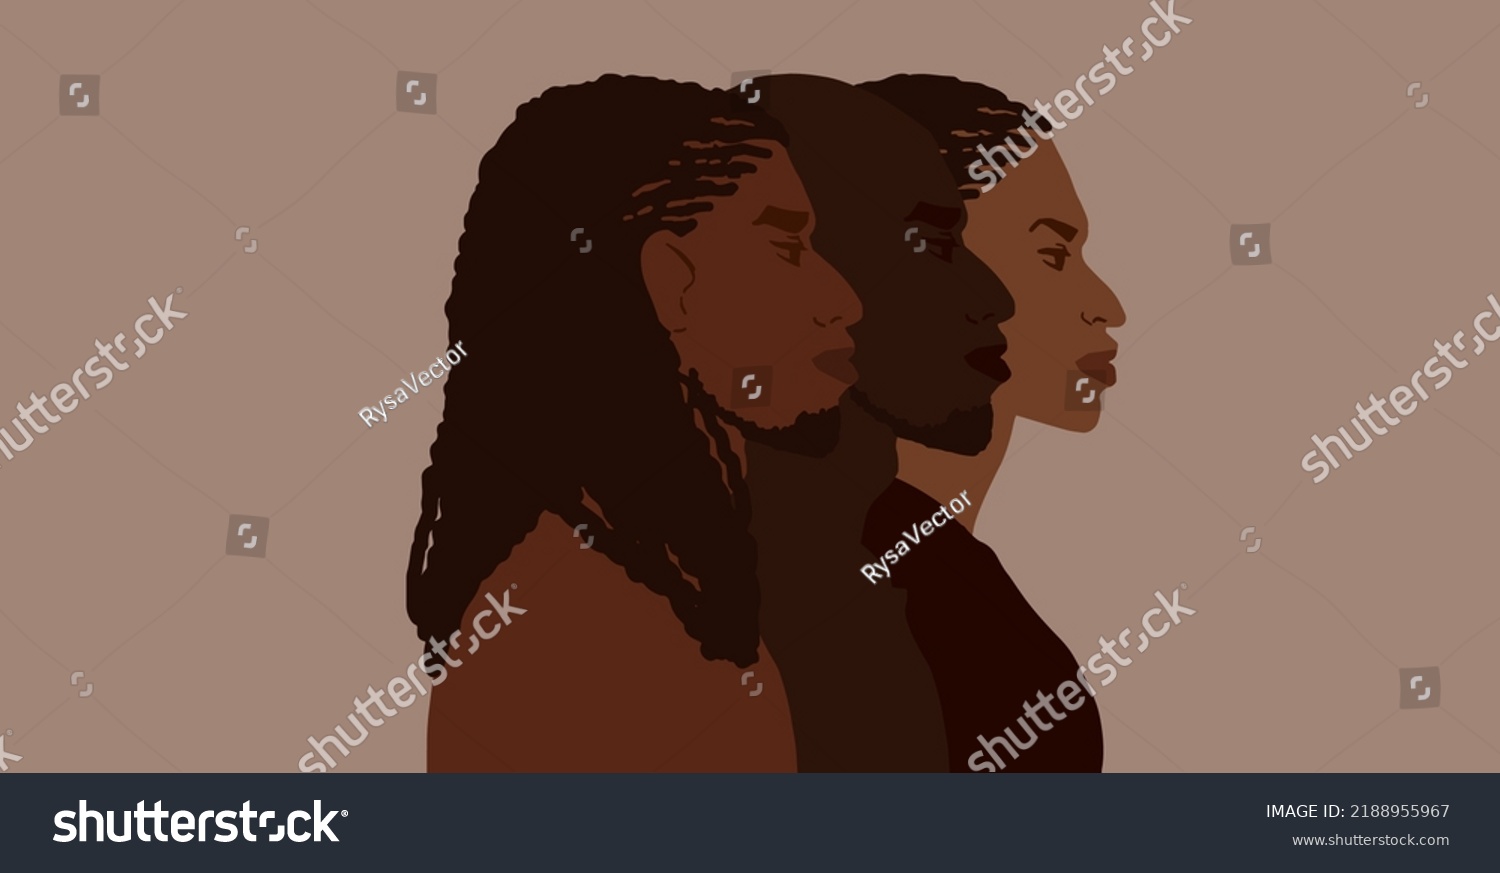 SVG of Group of african american people with differnt afro hair styles. Man and woman crowd illustration. Web banner art svg